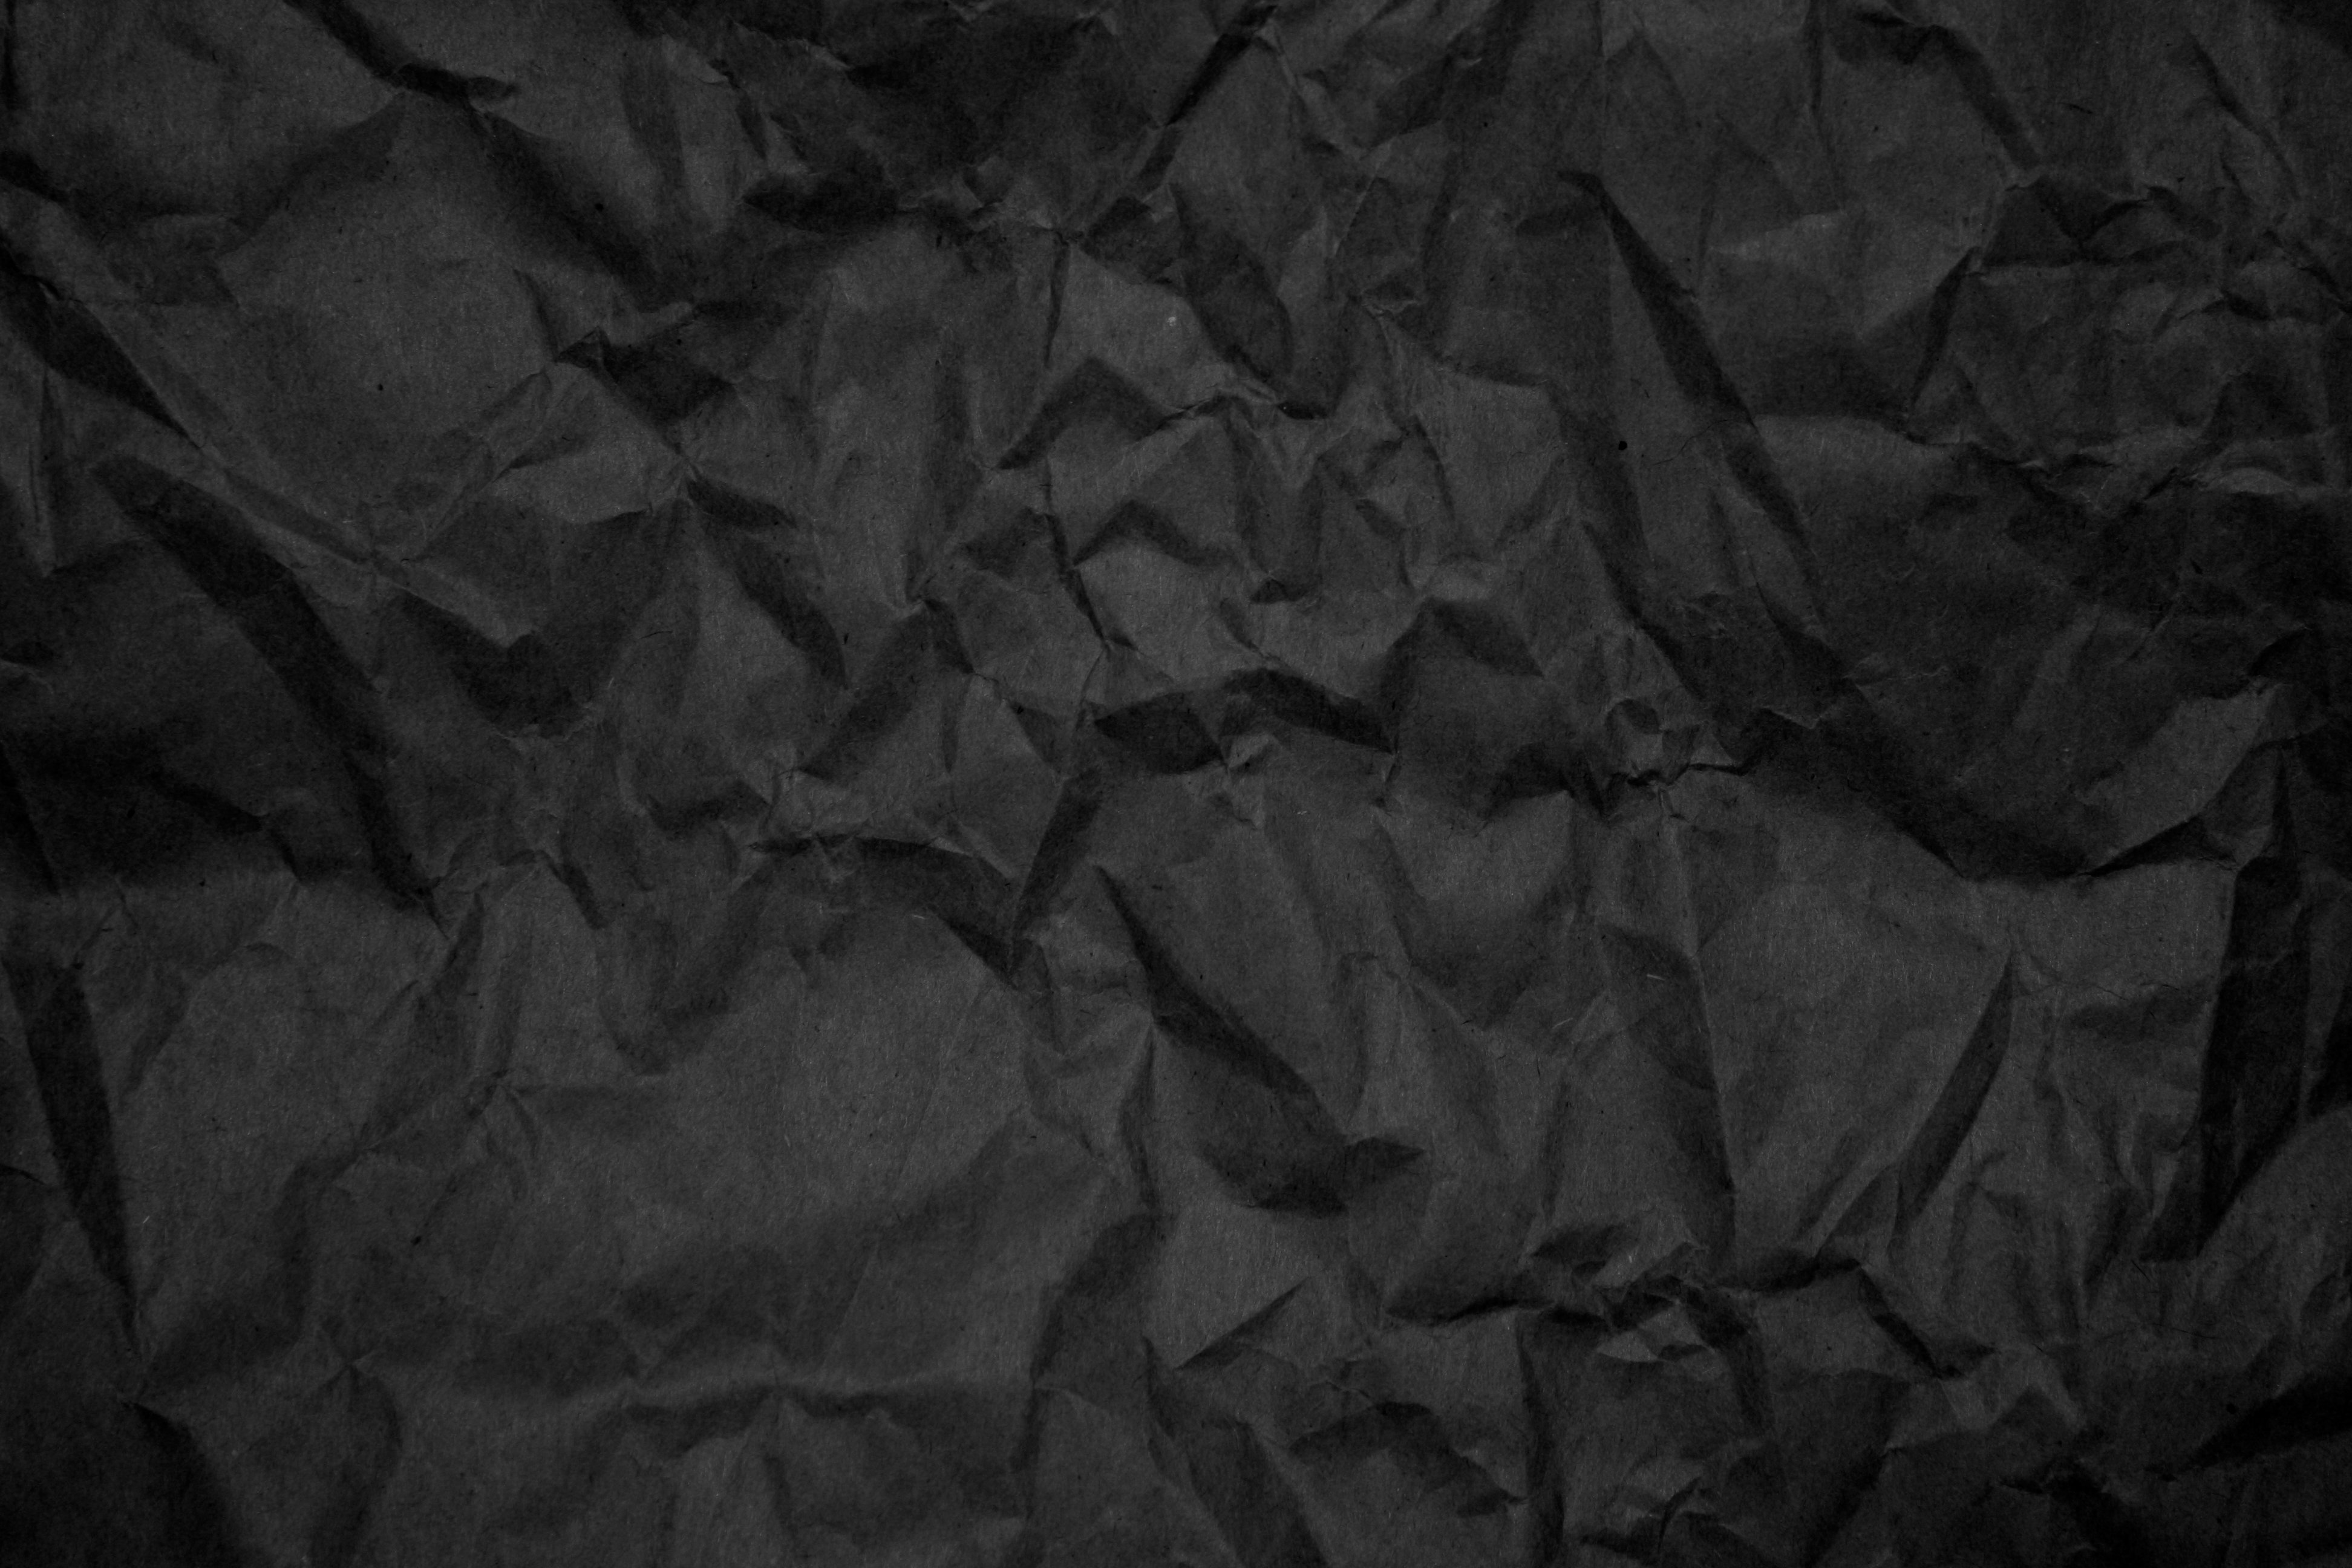 Crumpled Black Paper Texture Picture, Free Photograph